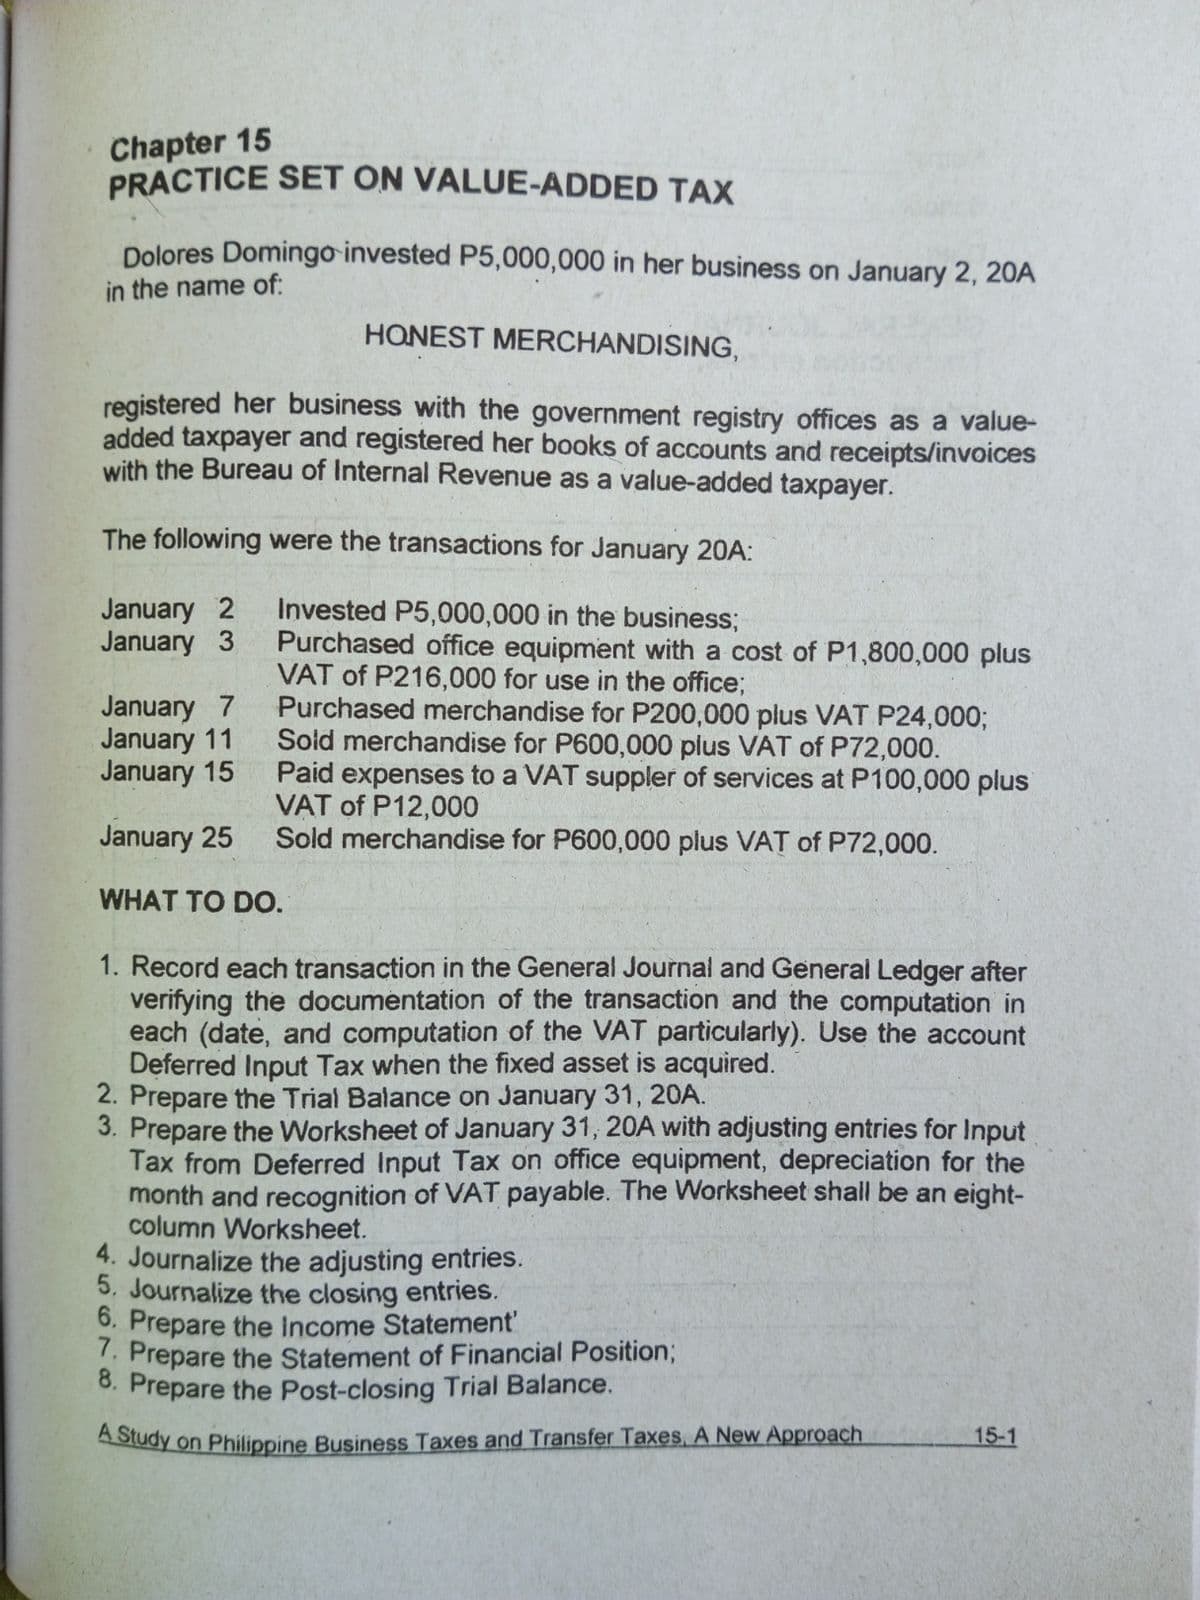 Chapter 15
PRACTICE SET ON VALUE-ADDED TAX
Dolores Domingo invested P5,000,000 in her business on January 2, 20A
in the name of:
HONEST MERCHANDISING,
registered her business with the government registry offices as a value-
added taxpayer and registered her books of accounts and receipts/invoices
with the Bureau of Internal Revenue as a value-added taxpayer.
The following were the transactions for January 20A:
January 2
January 3
Invested P5,000,000 in the business;
Purchased office equipment with a cost of P1,800,000 plus
VAT of P216,000 for use in the office;
Purchased merchandise for P200,000 plus VAT P24,000;
Soid merchandise for P600,000 plus VAT of P72,000.
Paid expenses to a VAT suppler of services at P100,000 plus
VAT of P12,000
Sold merchandise for P600,000 plus VAT of P72,000.
January 7
January 11
January 15
January 25
WHAT TO DO.
1. Record each transaction in the General Journal and General Ledger after
verifying the documentation of the transaction and the computation in
each (date, and computation of the VAT particularly). Use the account
Deferred Input Tax when the fixed asset is acquired.
2. Prepare the Trial Balance on January 31, 20A.
3. Prepare the Worksheet of January 31, 20A with adjusting entries for Input
Tax from Deferred Input Tax on office equipment, depreciation for the
month and recognition of VAT payable. The Worksheet shall be an eight-
column Worksheet.
4. Journalize the adjusting entries.
5, Journalize the closing entries.
6. Prepare the Income Statement'
. Prepare the Statement of Financial Position3;
8. Prepare the Post-closing Trial Balance.
ASudy on Philippine Business Taxes and Transfer Taxes, A New Approach
15-1
